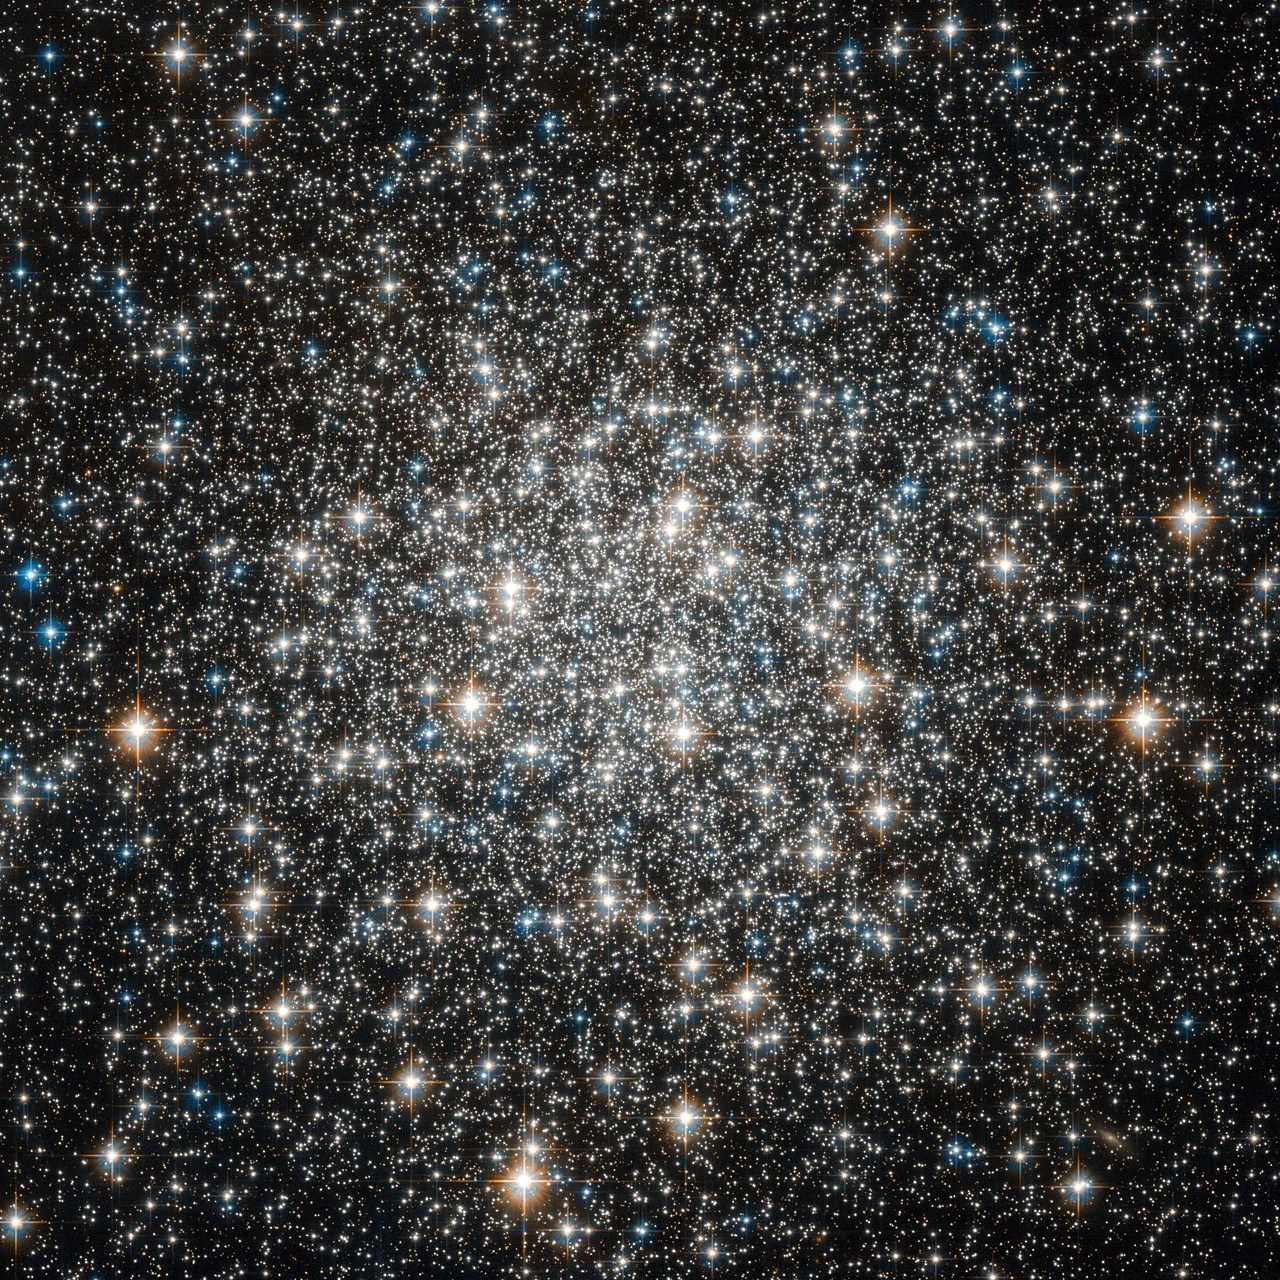 Hubble view of M10